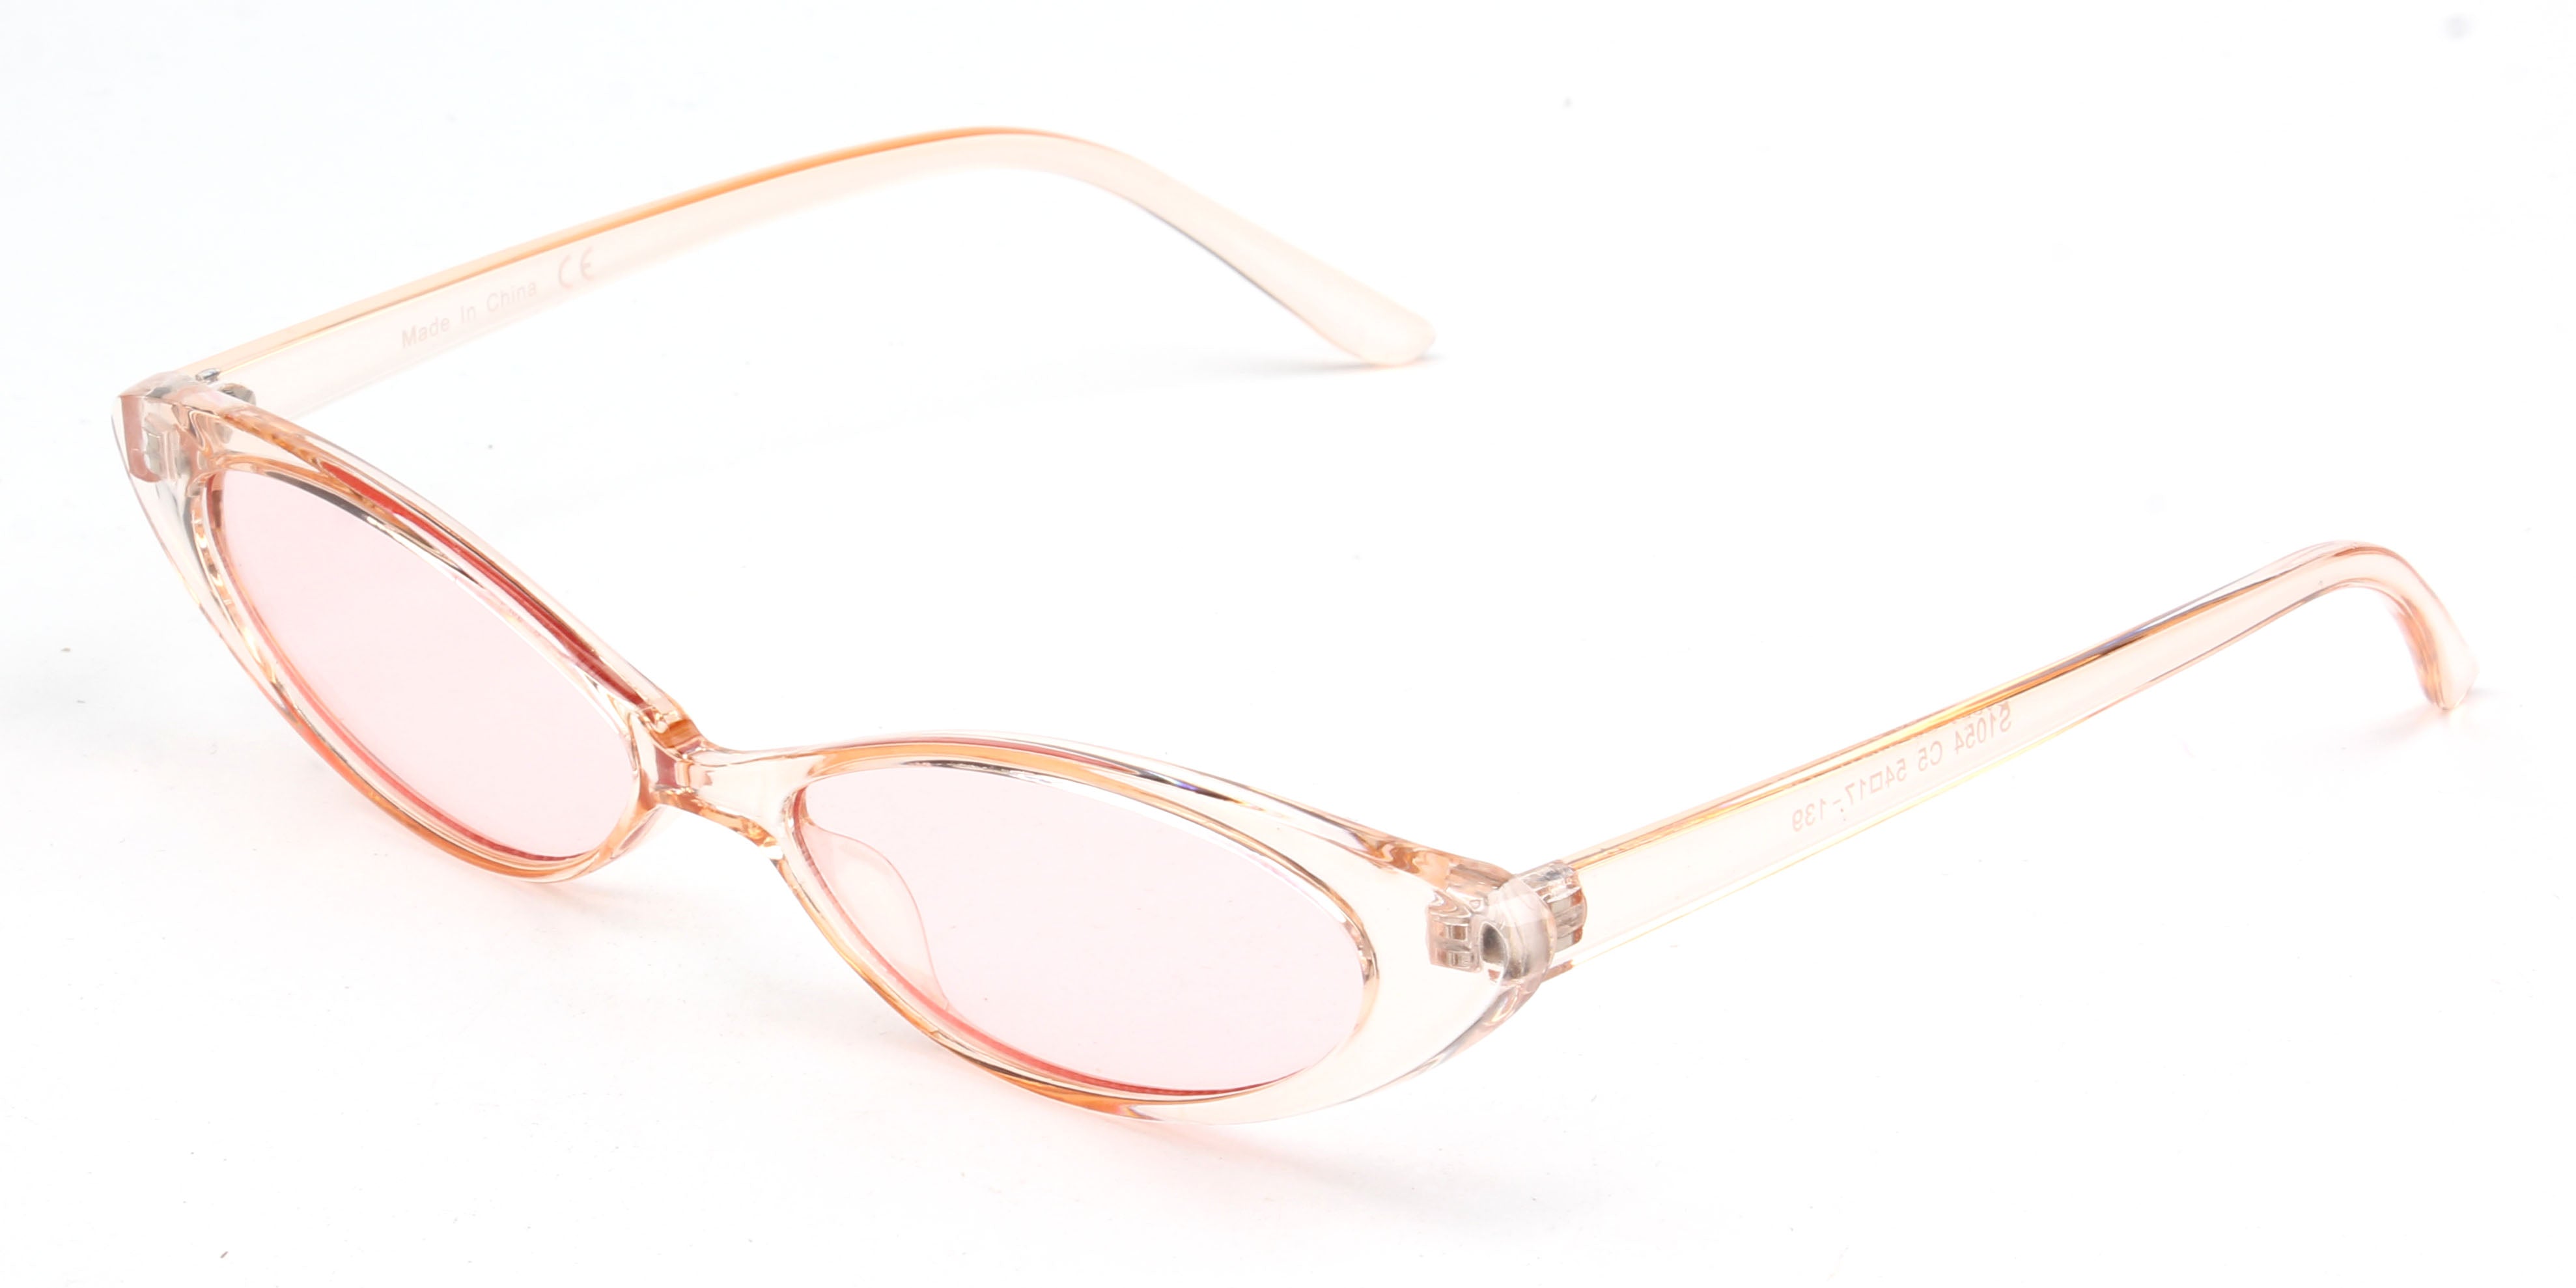 S1054 - Women Retro VINTAGE Slim Oval Sunglasses Clear Pink / Pink